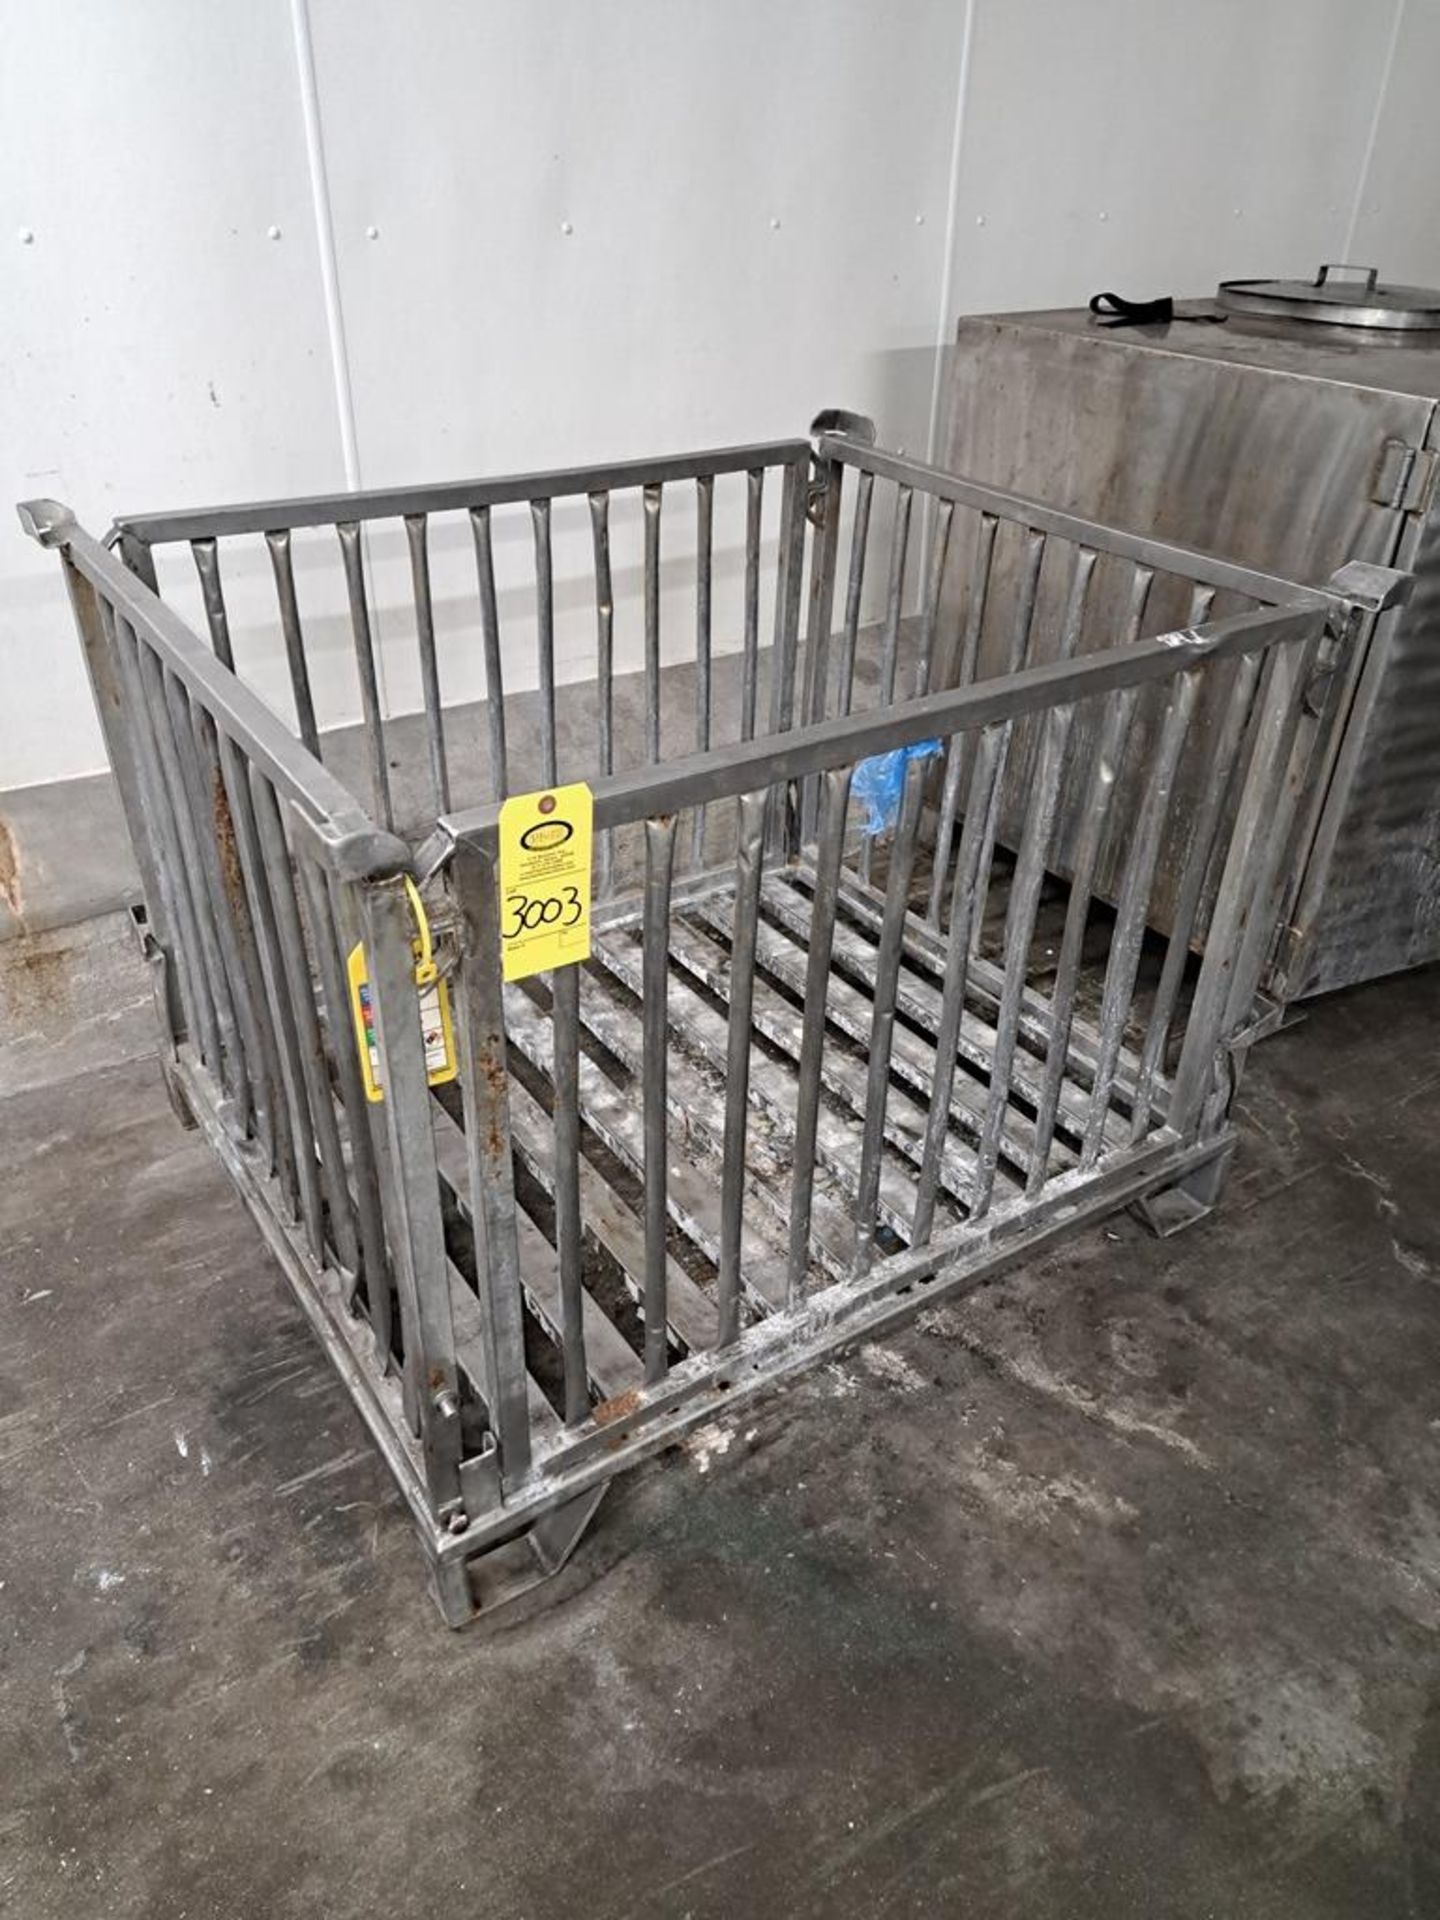 Stainless Steel Man Lift Safety Cage, 38" W X 46" L X 36" T (Contact Norm Pavlish - Nebraska